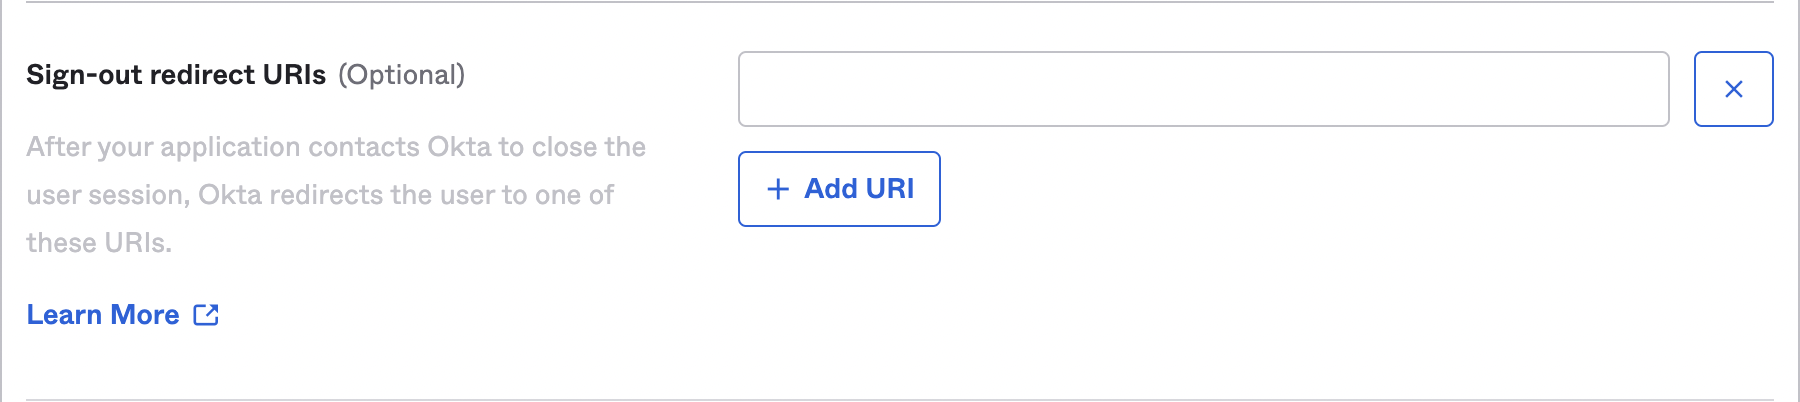 Sign-out redirect URIs After